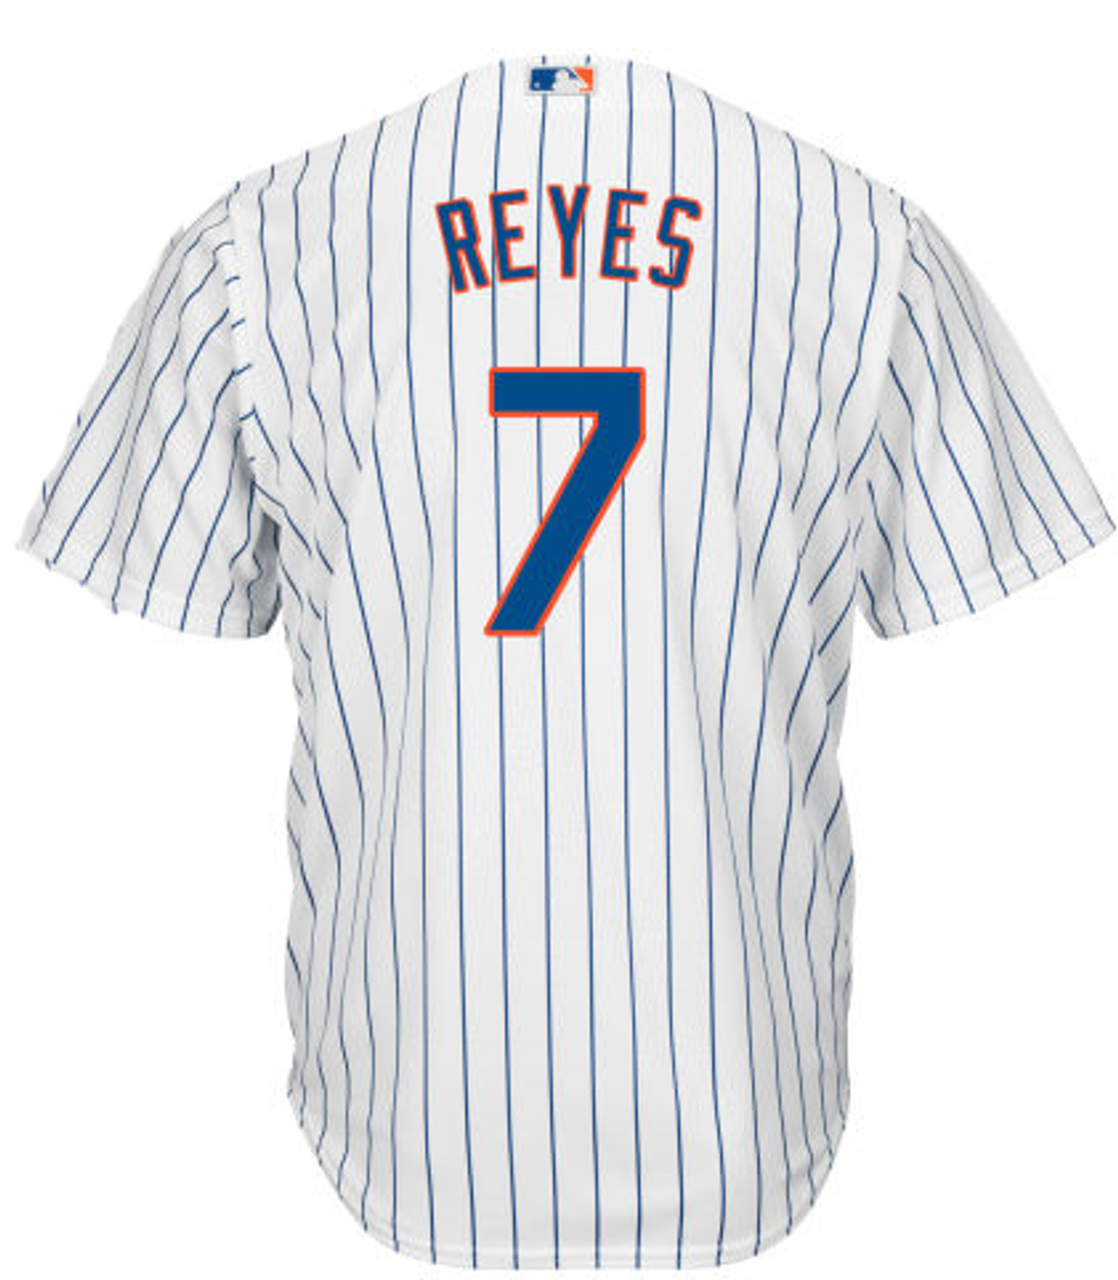 NY Mets Jose Reyes Youth Jersey